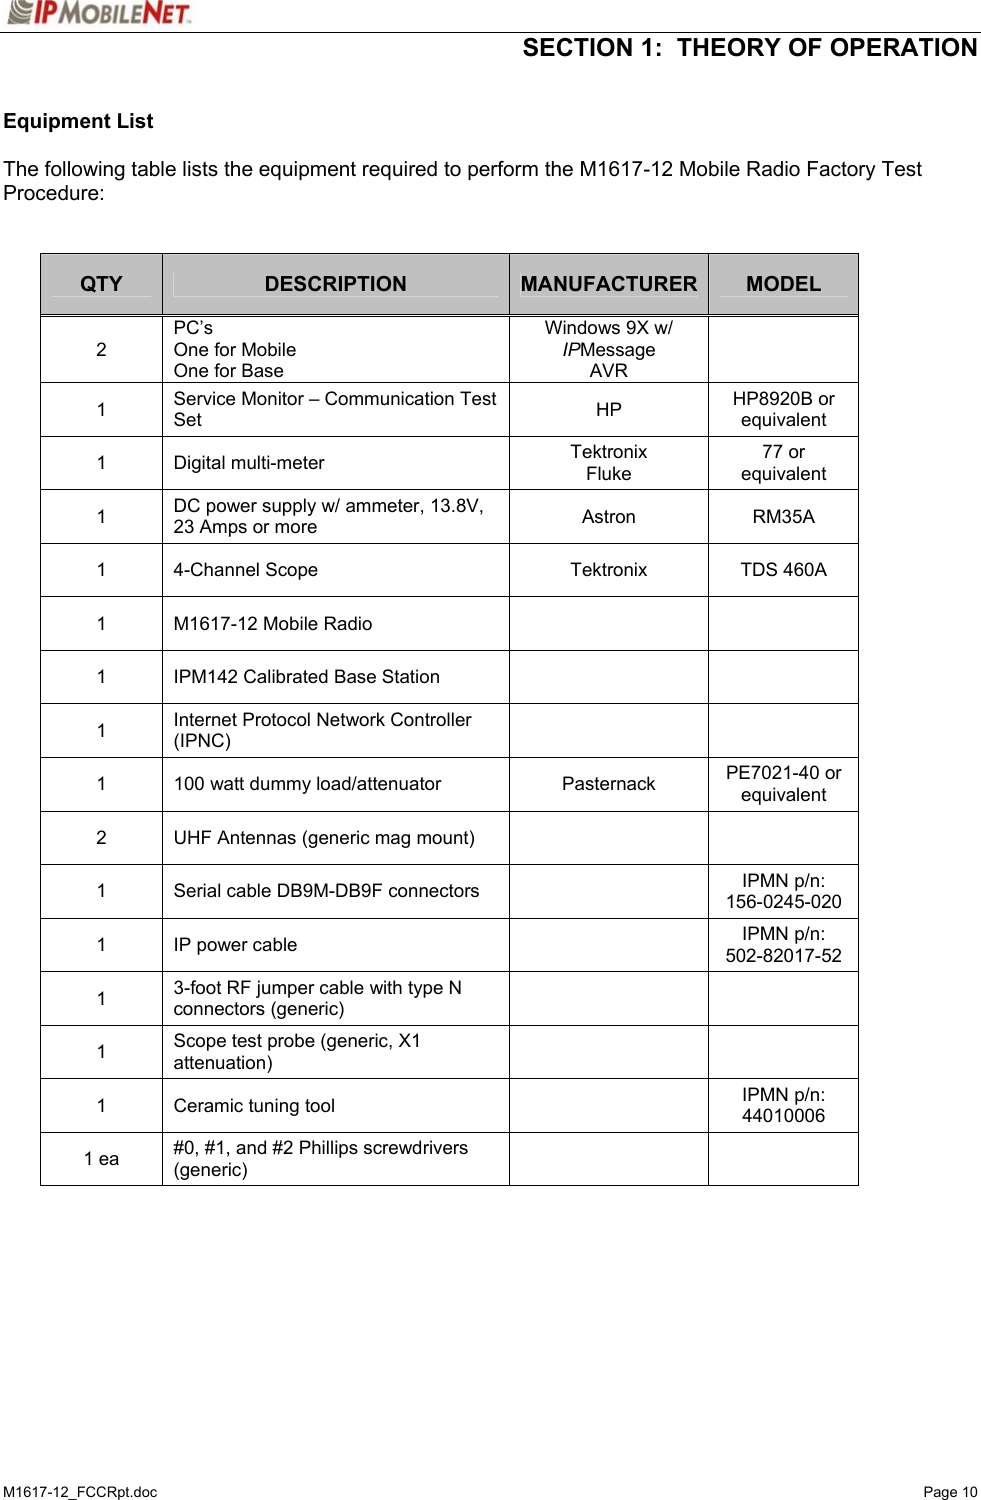  SECTION 1:  THEORY OF OPERATION  M1617-12_FCCRpt.doc   Page 10  Equipment List   The following table lists the equipment required to perform the M1617-12 Mobile Radio Factory Test Procedure:   QTY  DESCRIPTION  MANUFACTURER MODEL 2 PC’s One for Mobile One for Base Windows 9X w/ IPMessage AVR  1  Service Monitor – Communication Test Set  HP  HP8920B or equivalent 1 Digital multi-meter  Tektronix Fluke 77 or equivalent 1  DC power supply w/ ammeter, 13.8V, 23 Amps or more  Astron  RM35A   1  4-Channel Scope  Tektronix  TDS 460A 1  M1617-12 Mobile Radio     1  IPM142 Calibrated Base Station     1  Internet Protocol Network Controller (IPNC)    1  100 watt dummy load/attenuator  Pasternack  PE7021-40 or equivalent 2  UHF Antennas (generic mag mount)     1  Serial cable DB9M-DB9F connectors    IPMN p/n:  156-0245-020 1  IP power cable    IPMN p/n: 502-82017-52 1  3-foot RF jumper cable with type N connectors (generic)    1  Scope test probe (generic, X1 attenuation)    1  Ceramic tuning tool    IPMN p/n: 44010006 1 ea  #0, #1, and #2 Phillips screwdrivers (generic)       